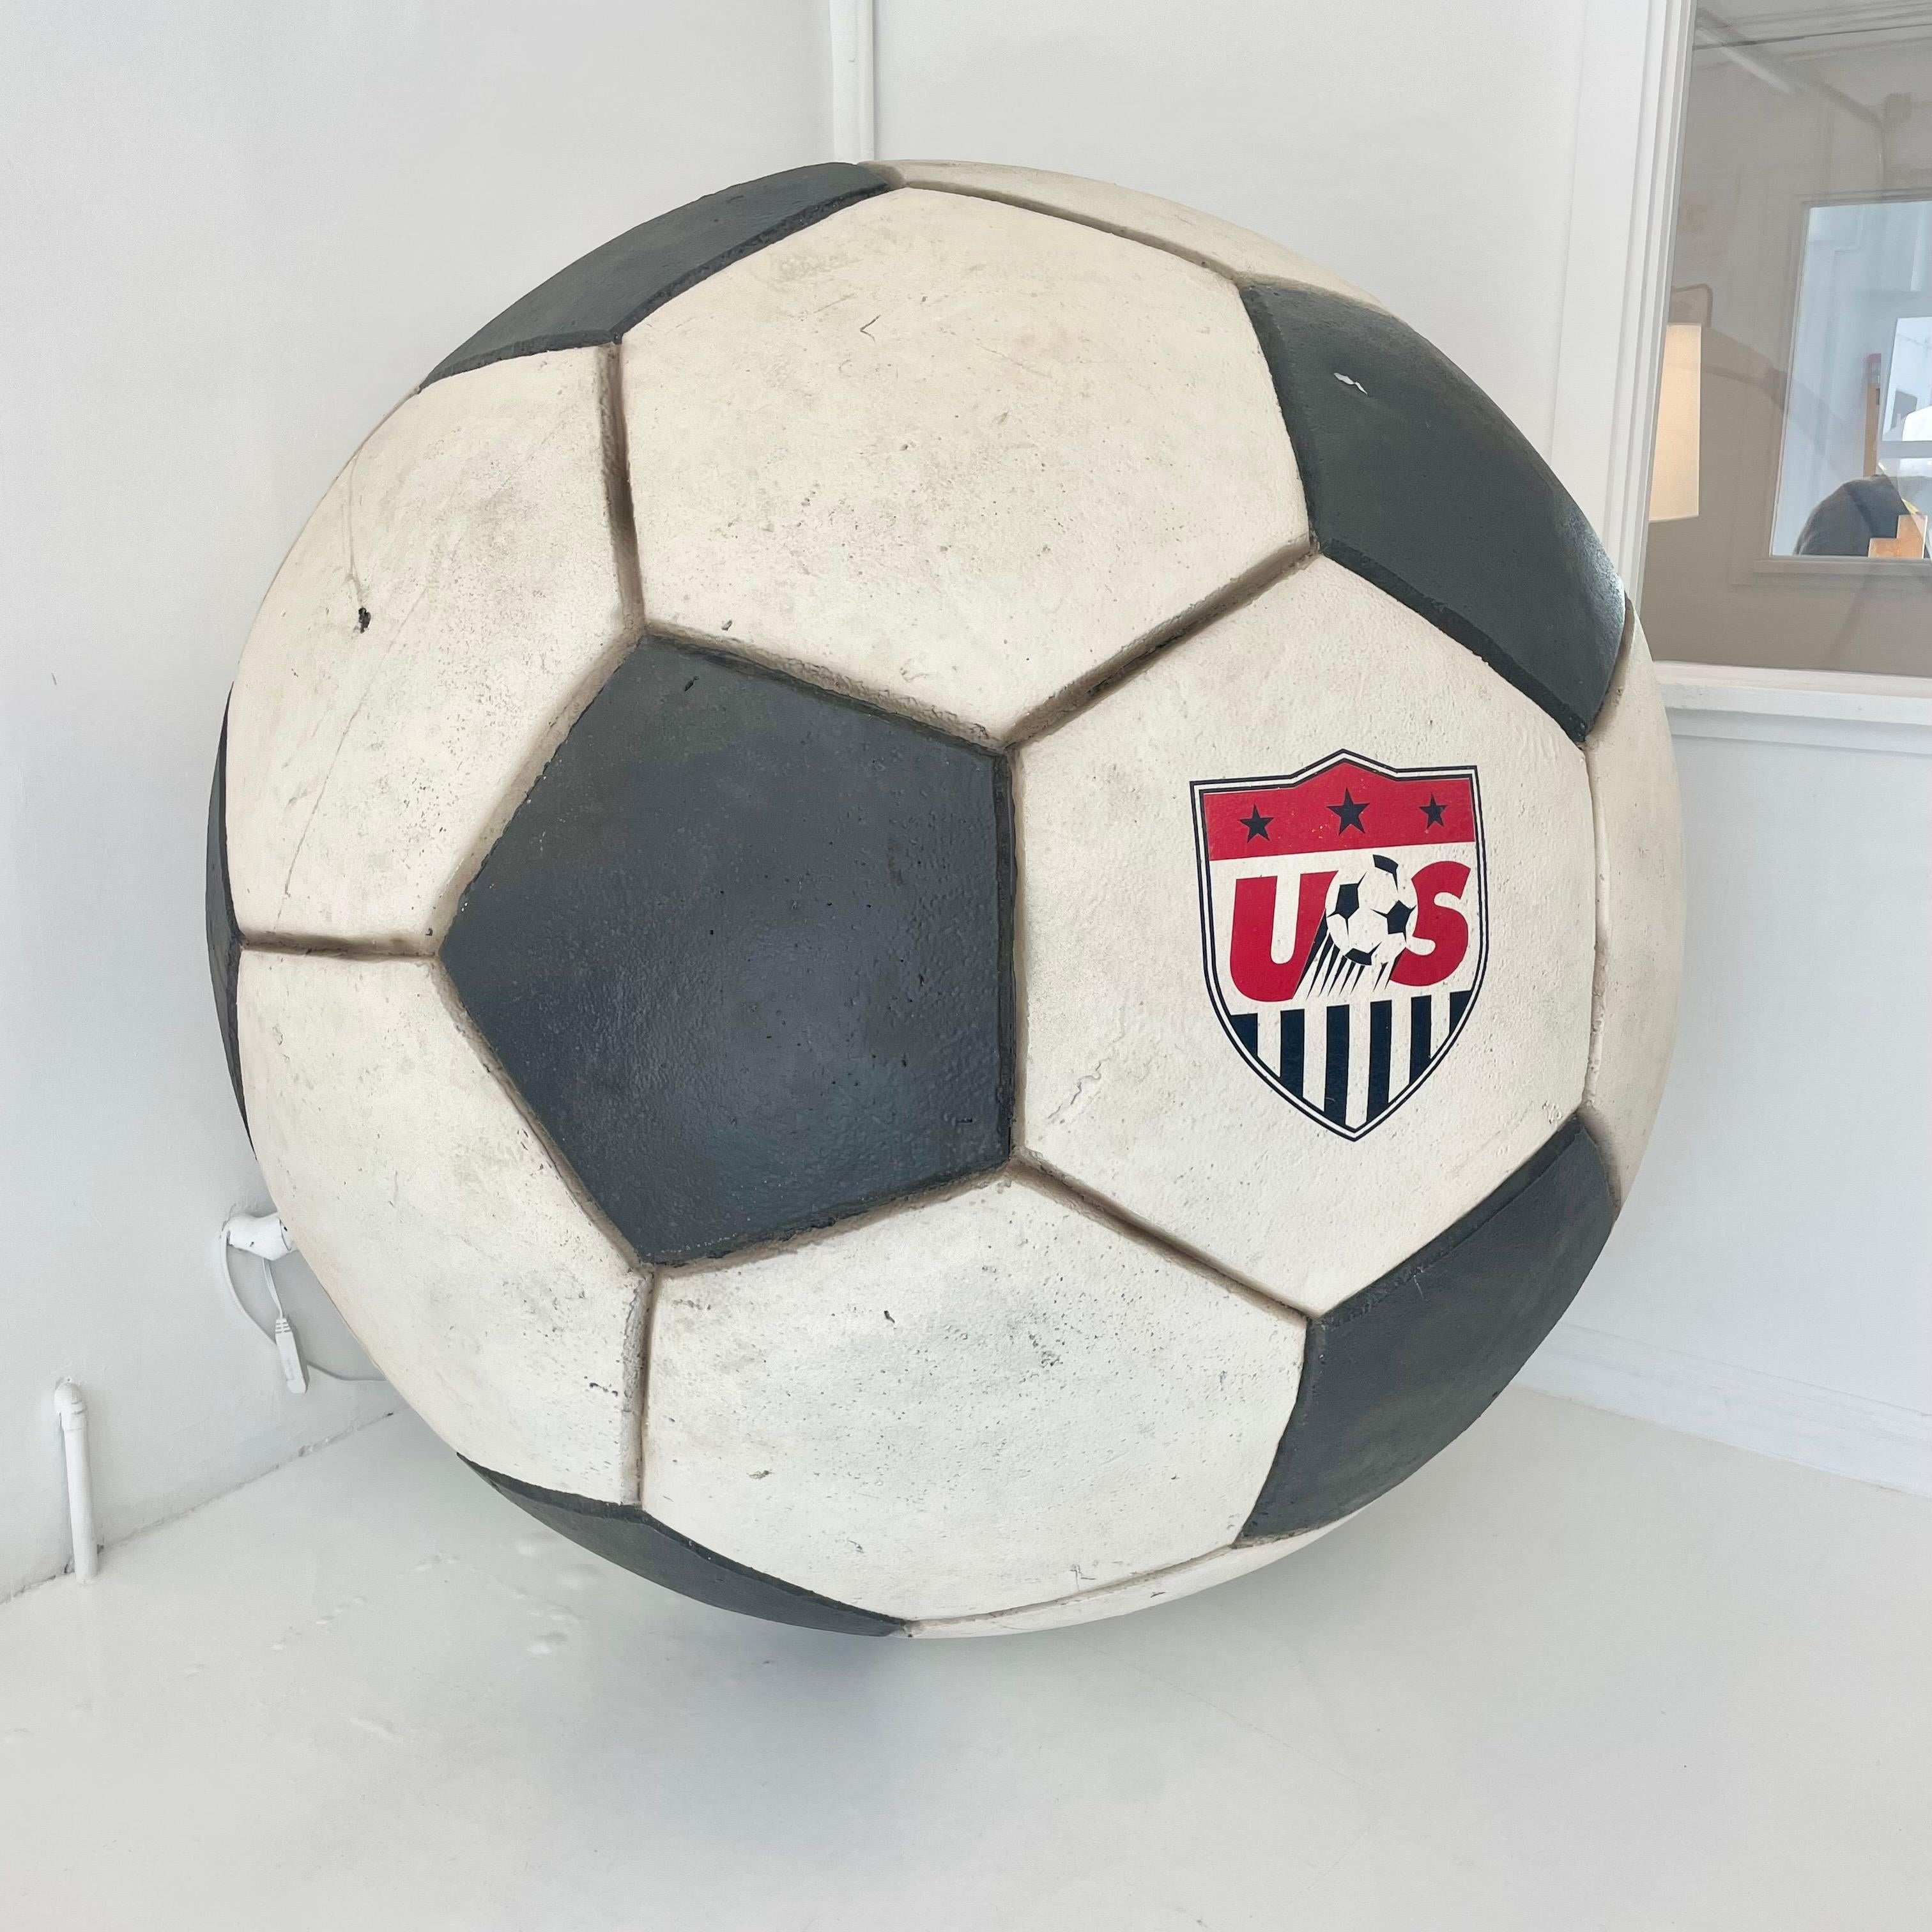 Late 20th Century Gigantic 6 Foot Soccer Ball